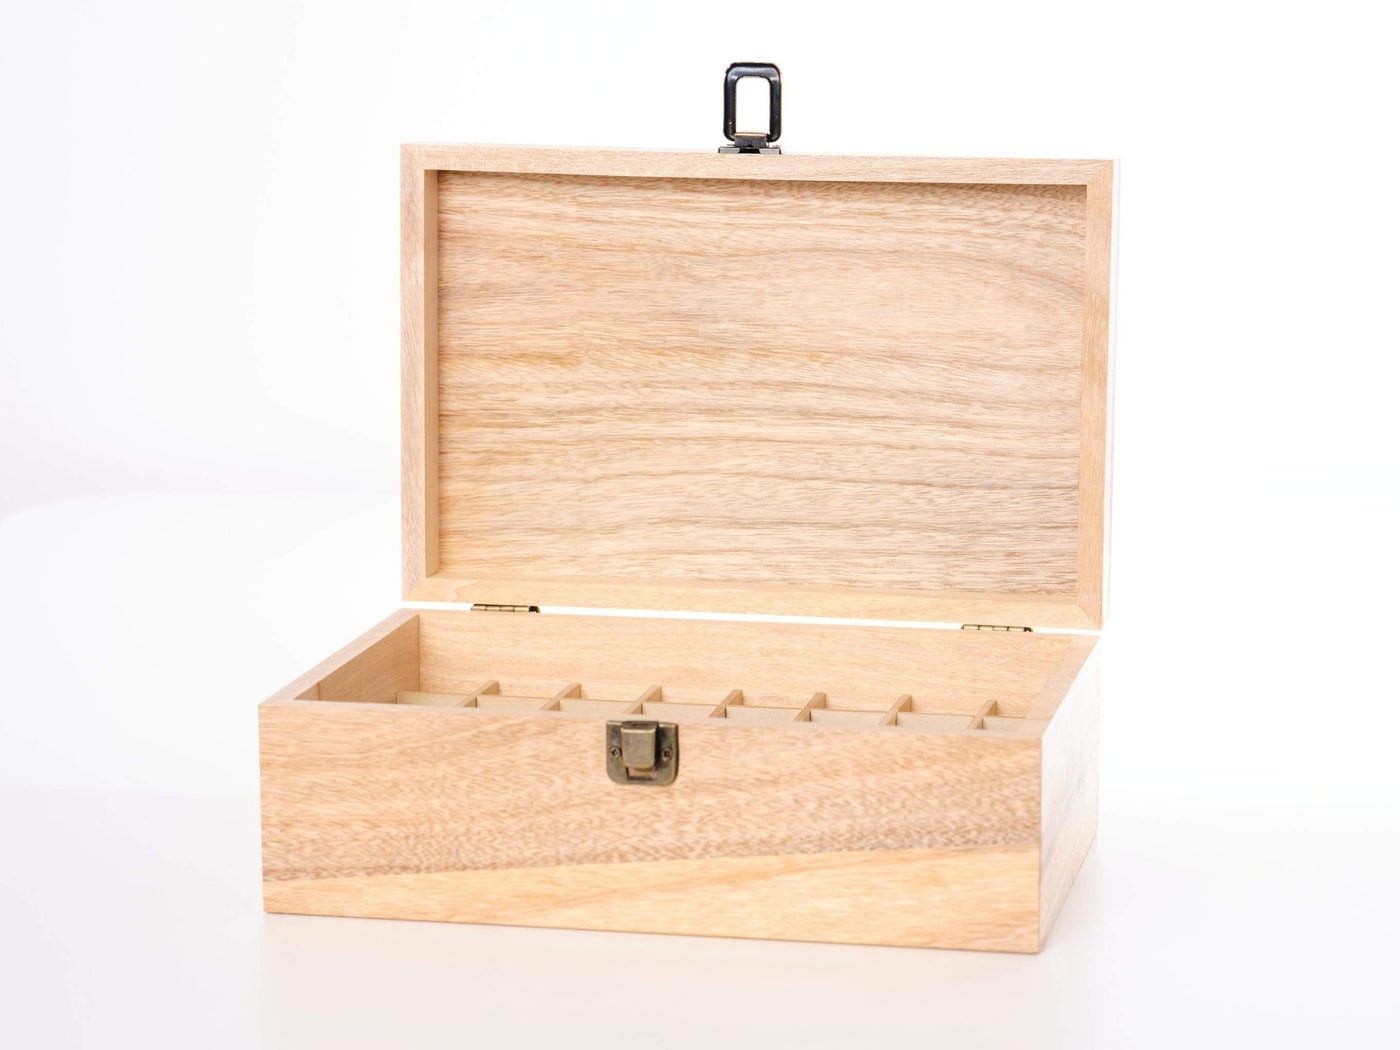 Essential Oil Box with Latch - Oil Life Canada - Canada's Best Essential Oil Supplies